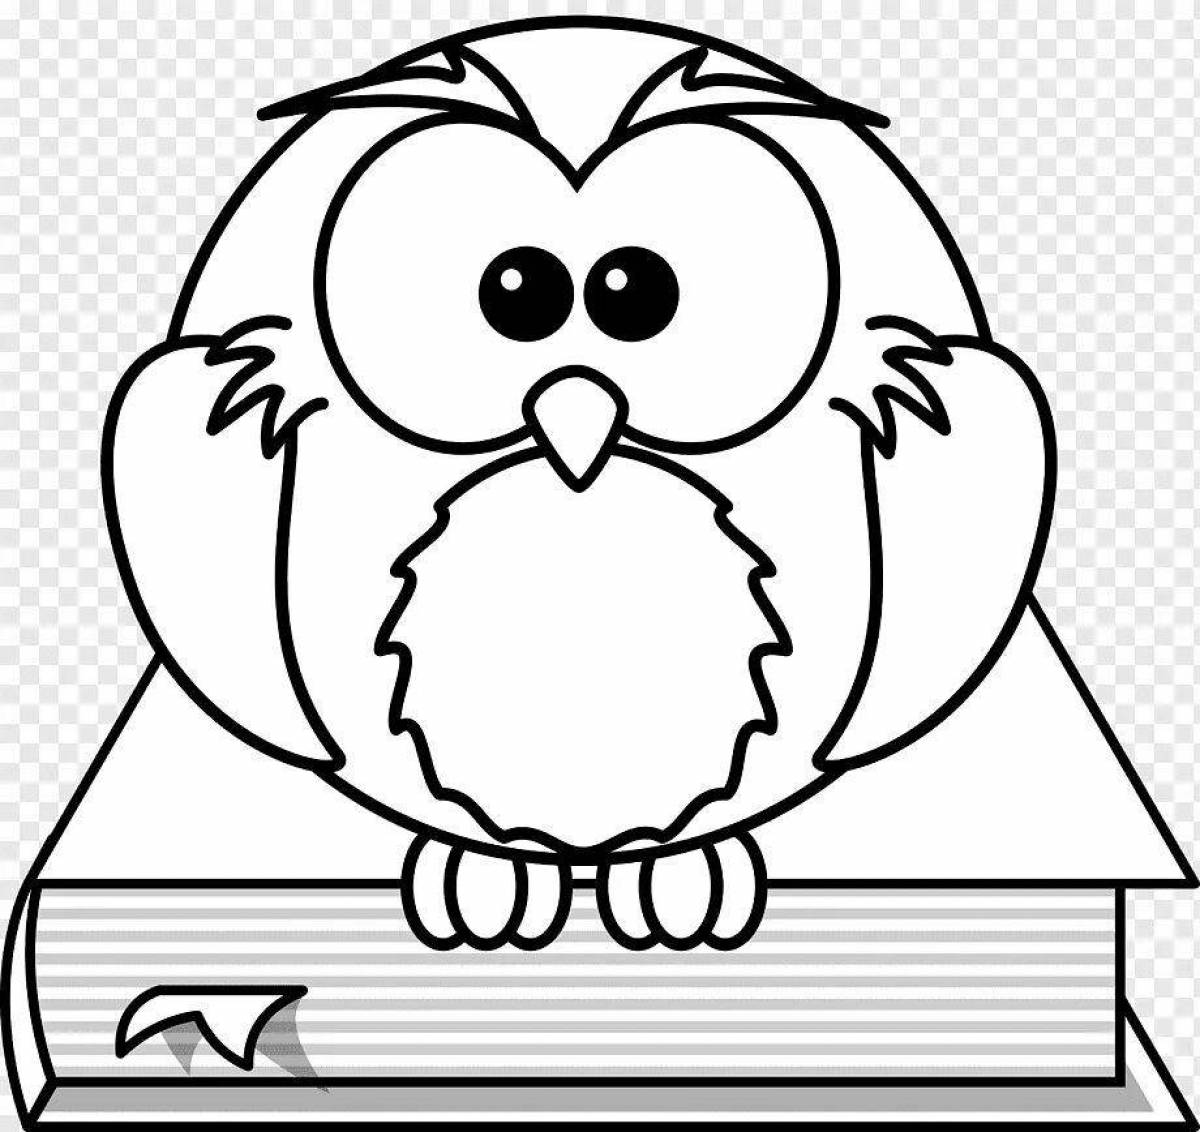 Coloring book gorgeous smart owl